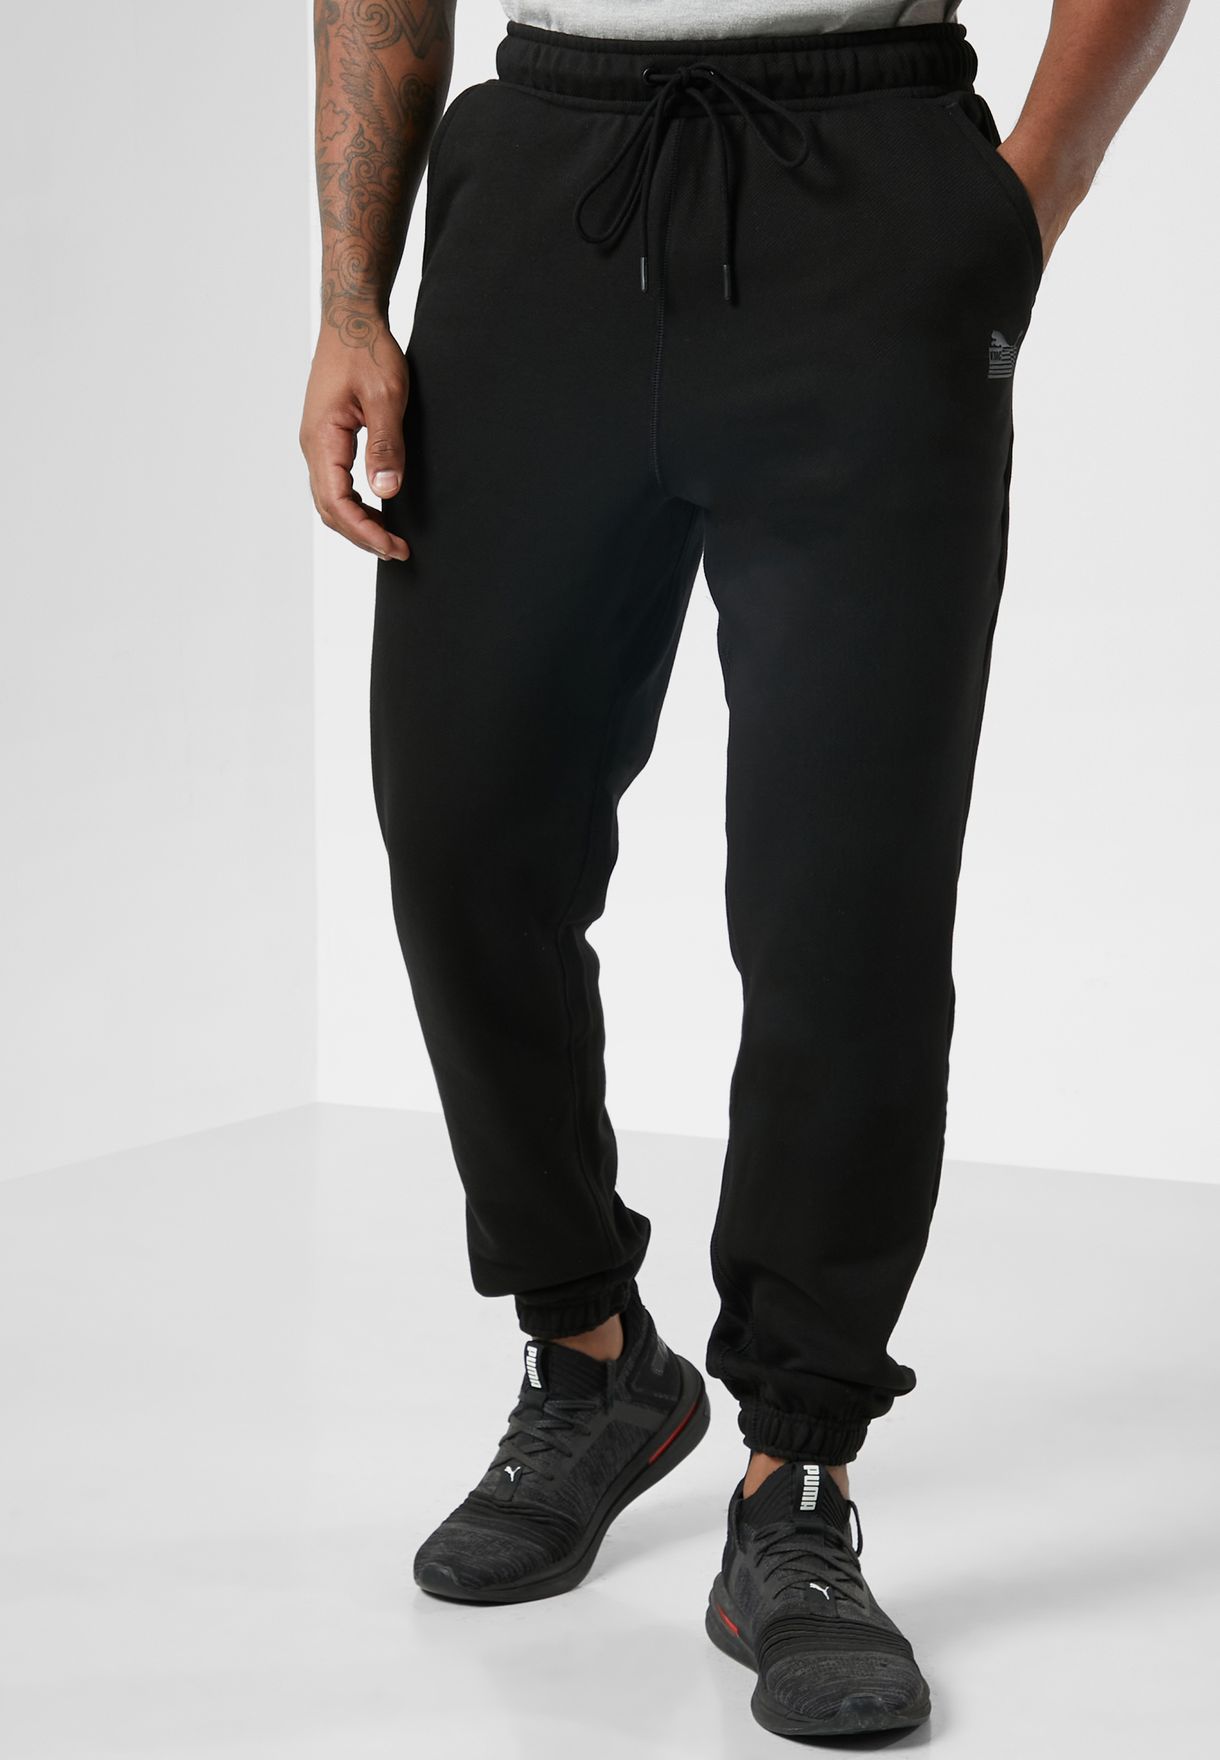 Every Day Hussle Men Sweatpants